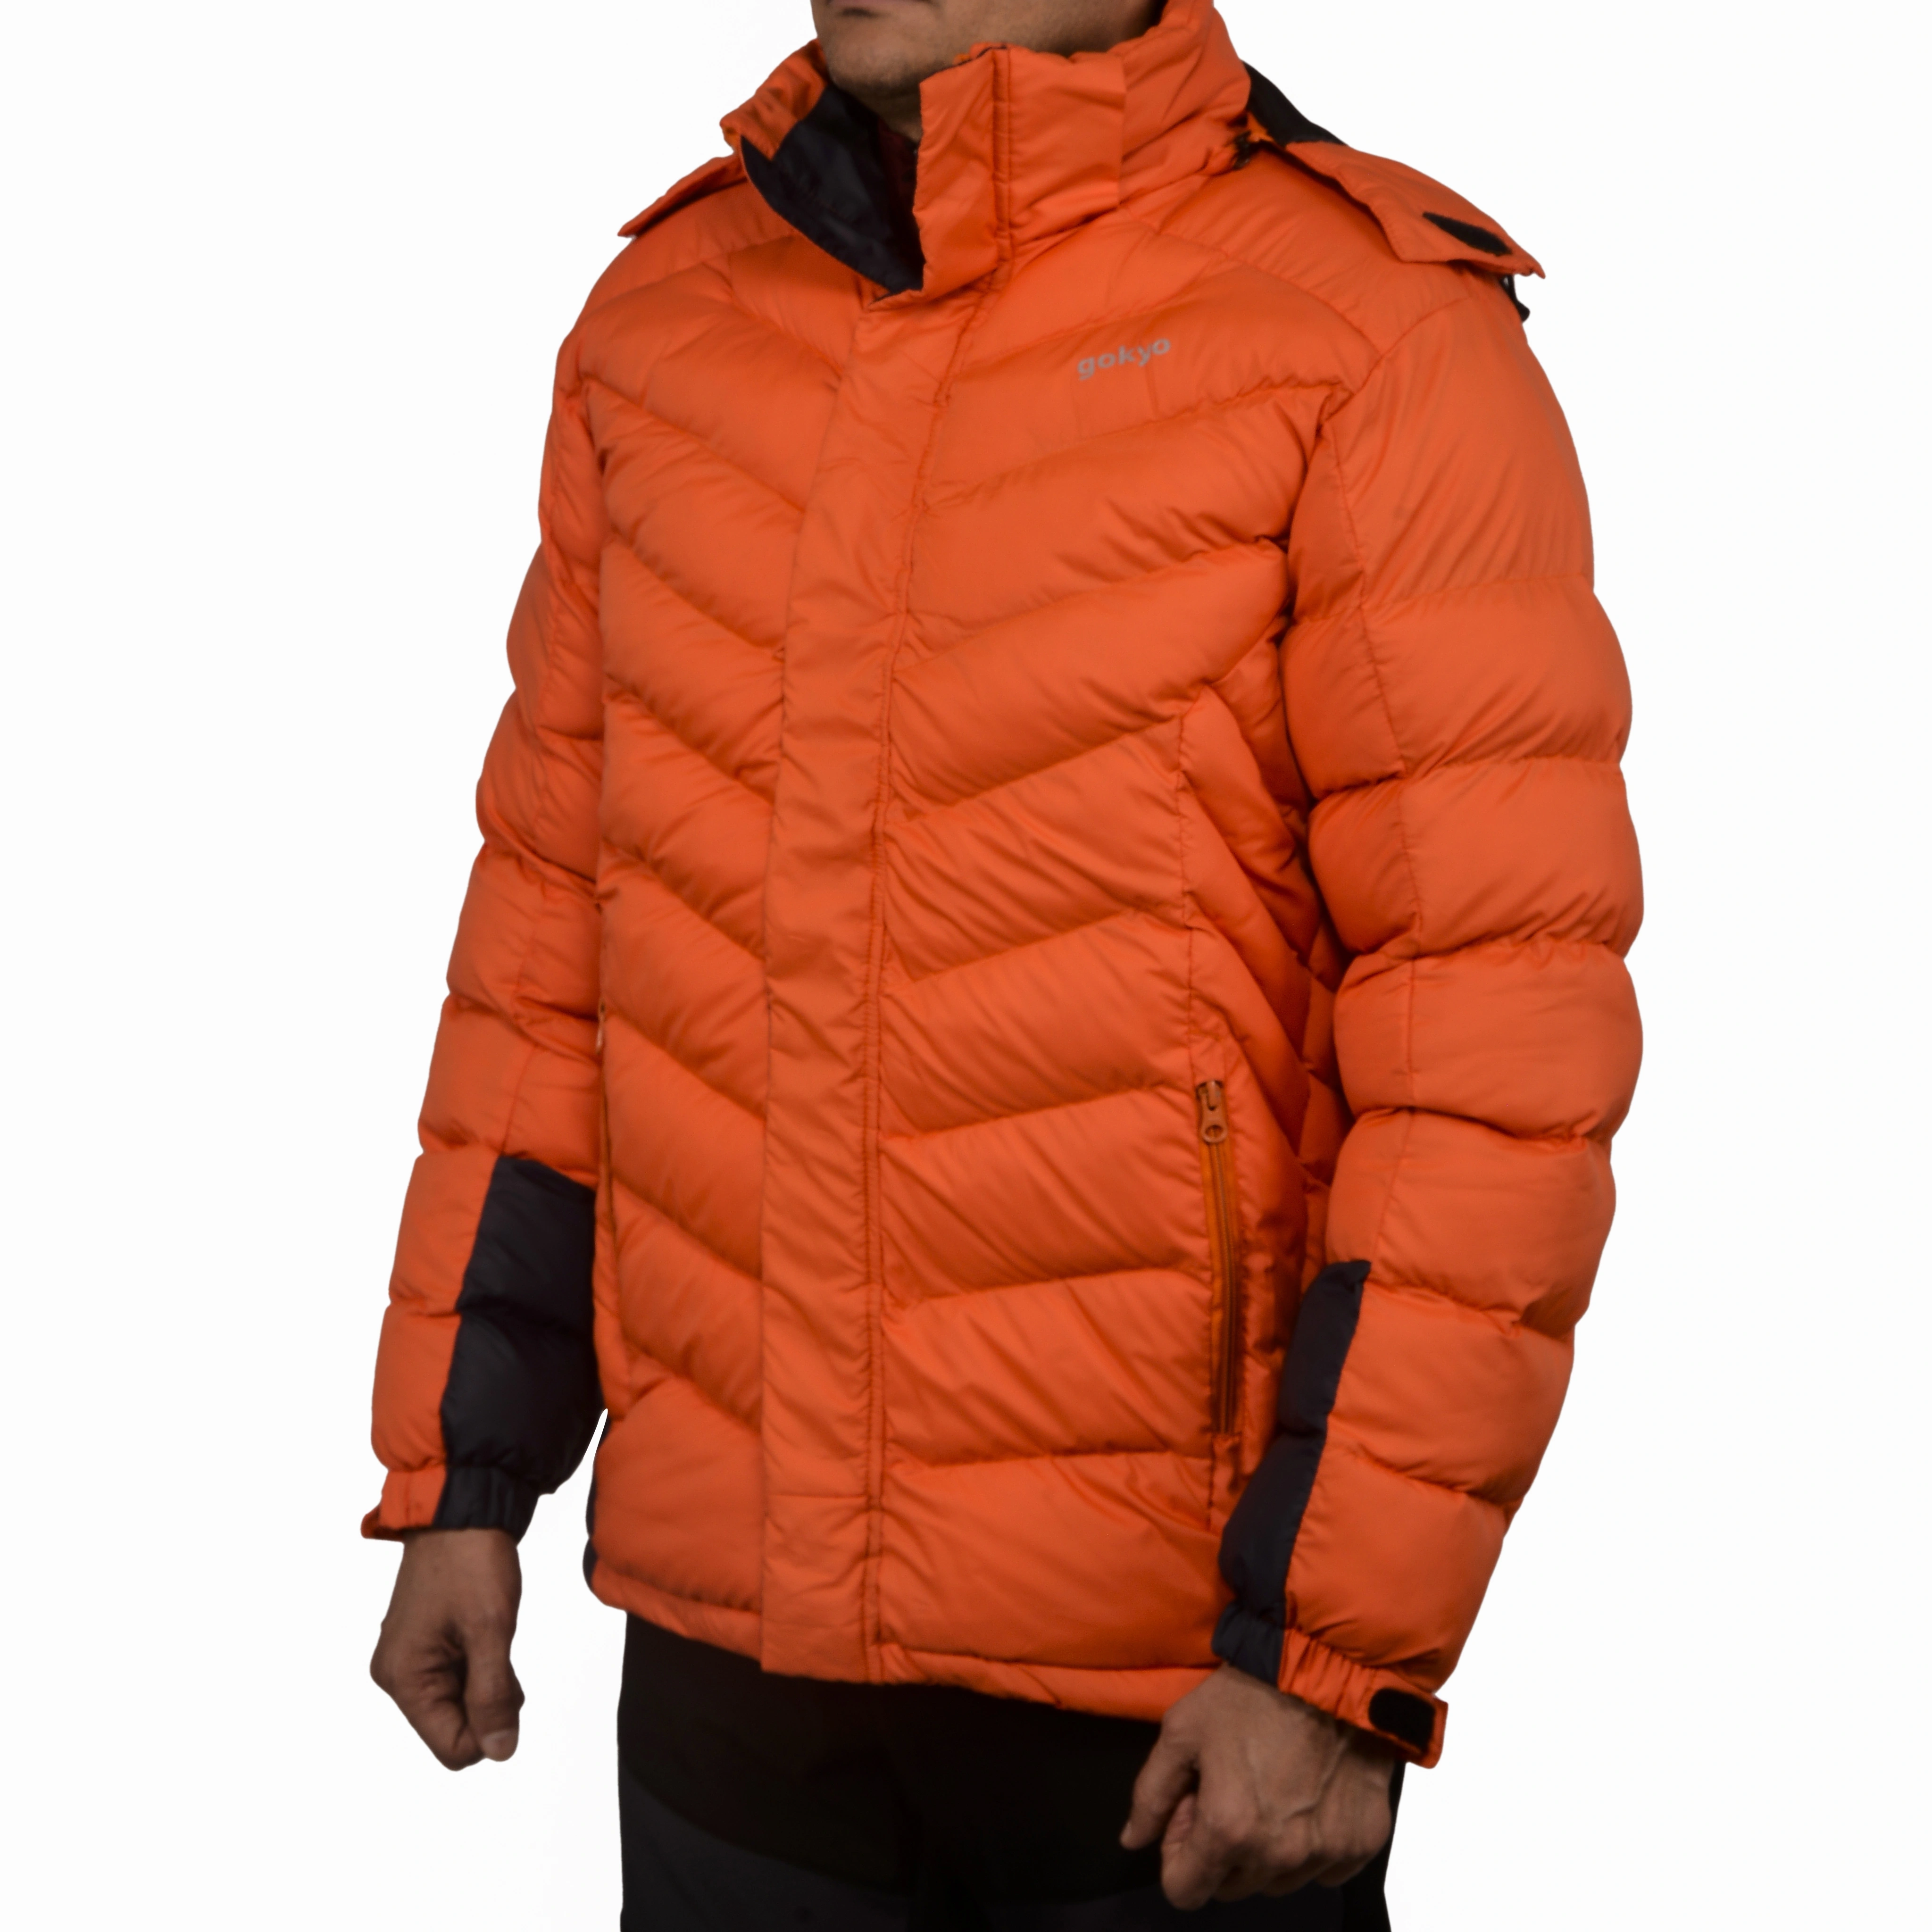 K2 Survivor Down Jacket for Men: Stylized Functionality for Extreme Cold Weather Expeditions (Up to -20°C)-XXL-Orange-2